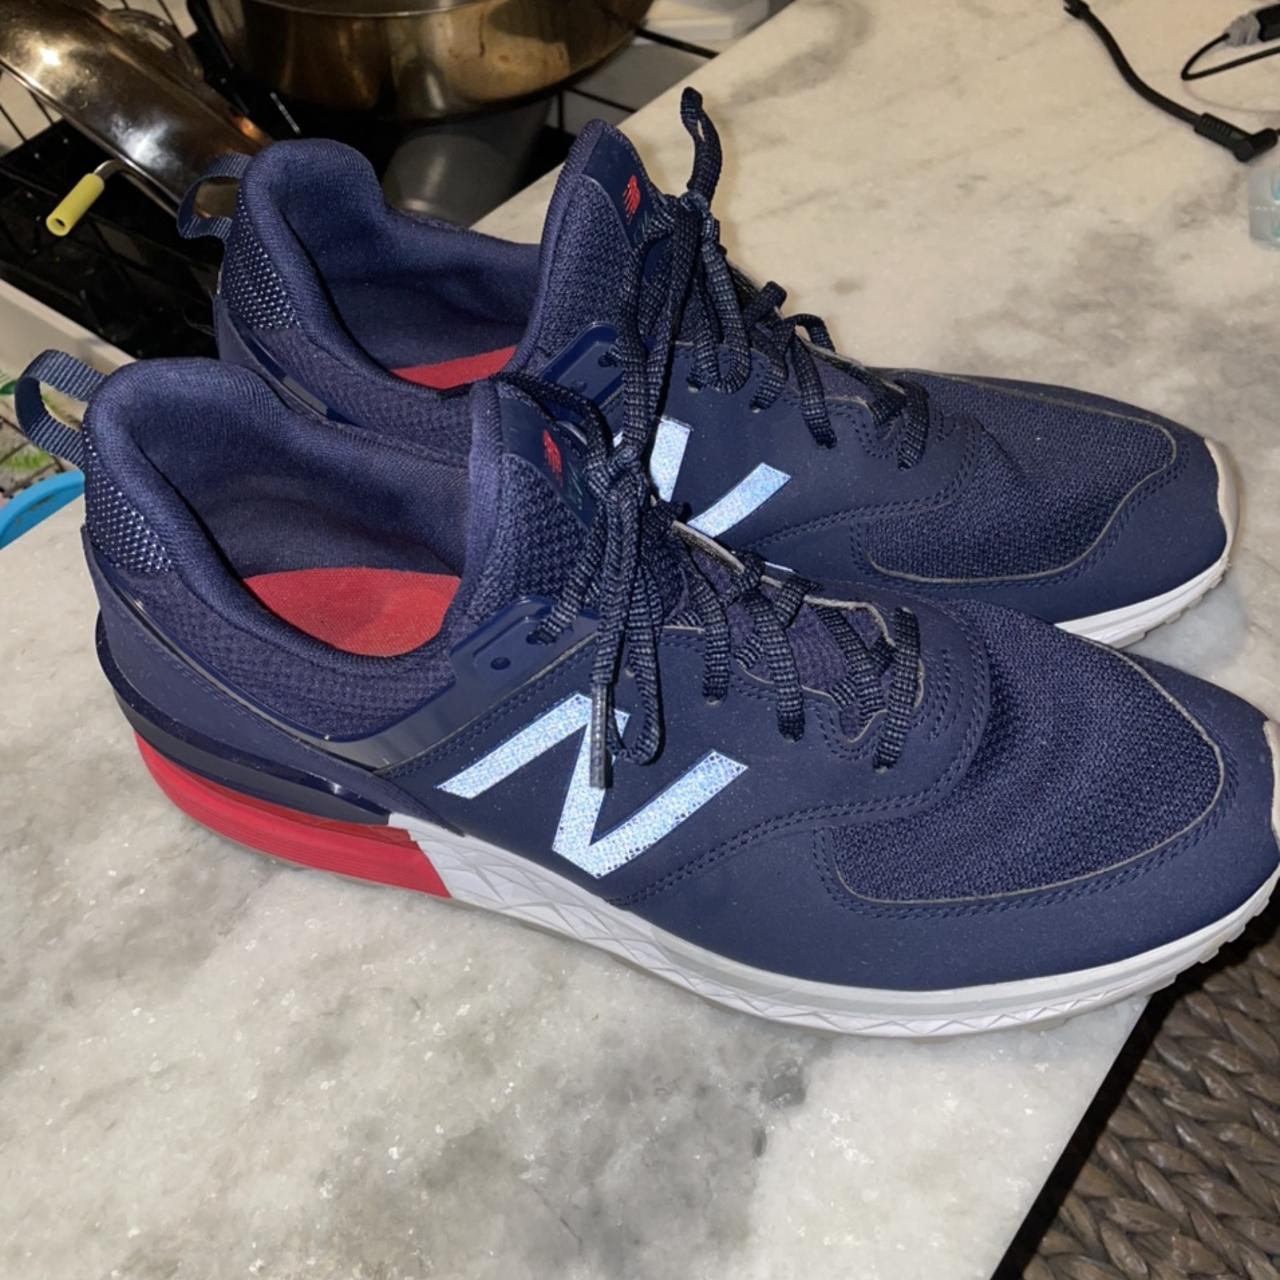 New Balance Men's Navy and Red